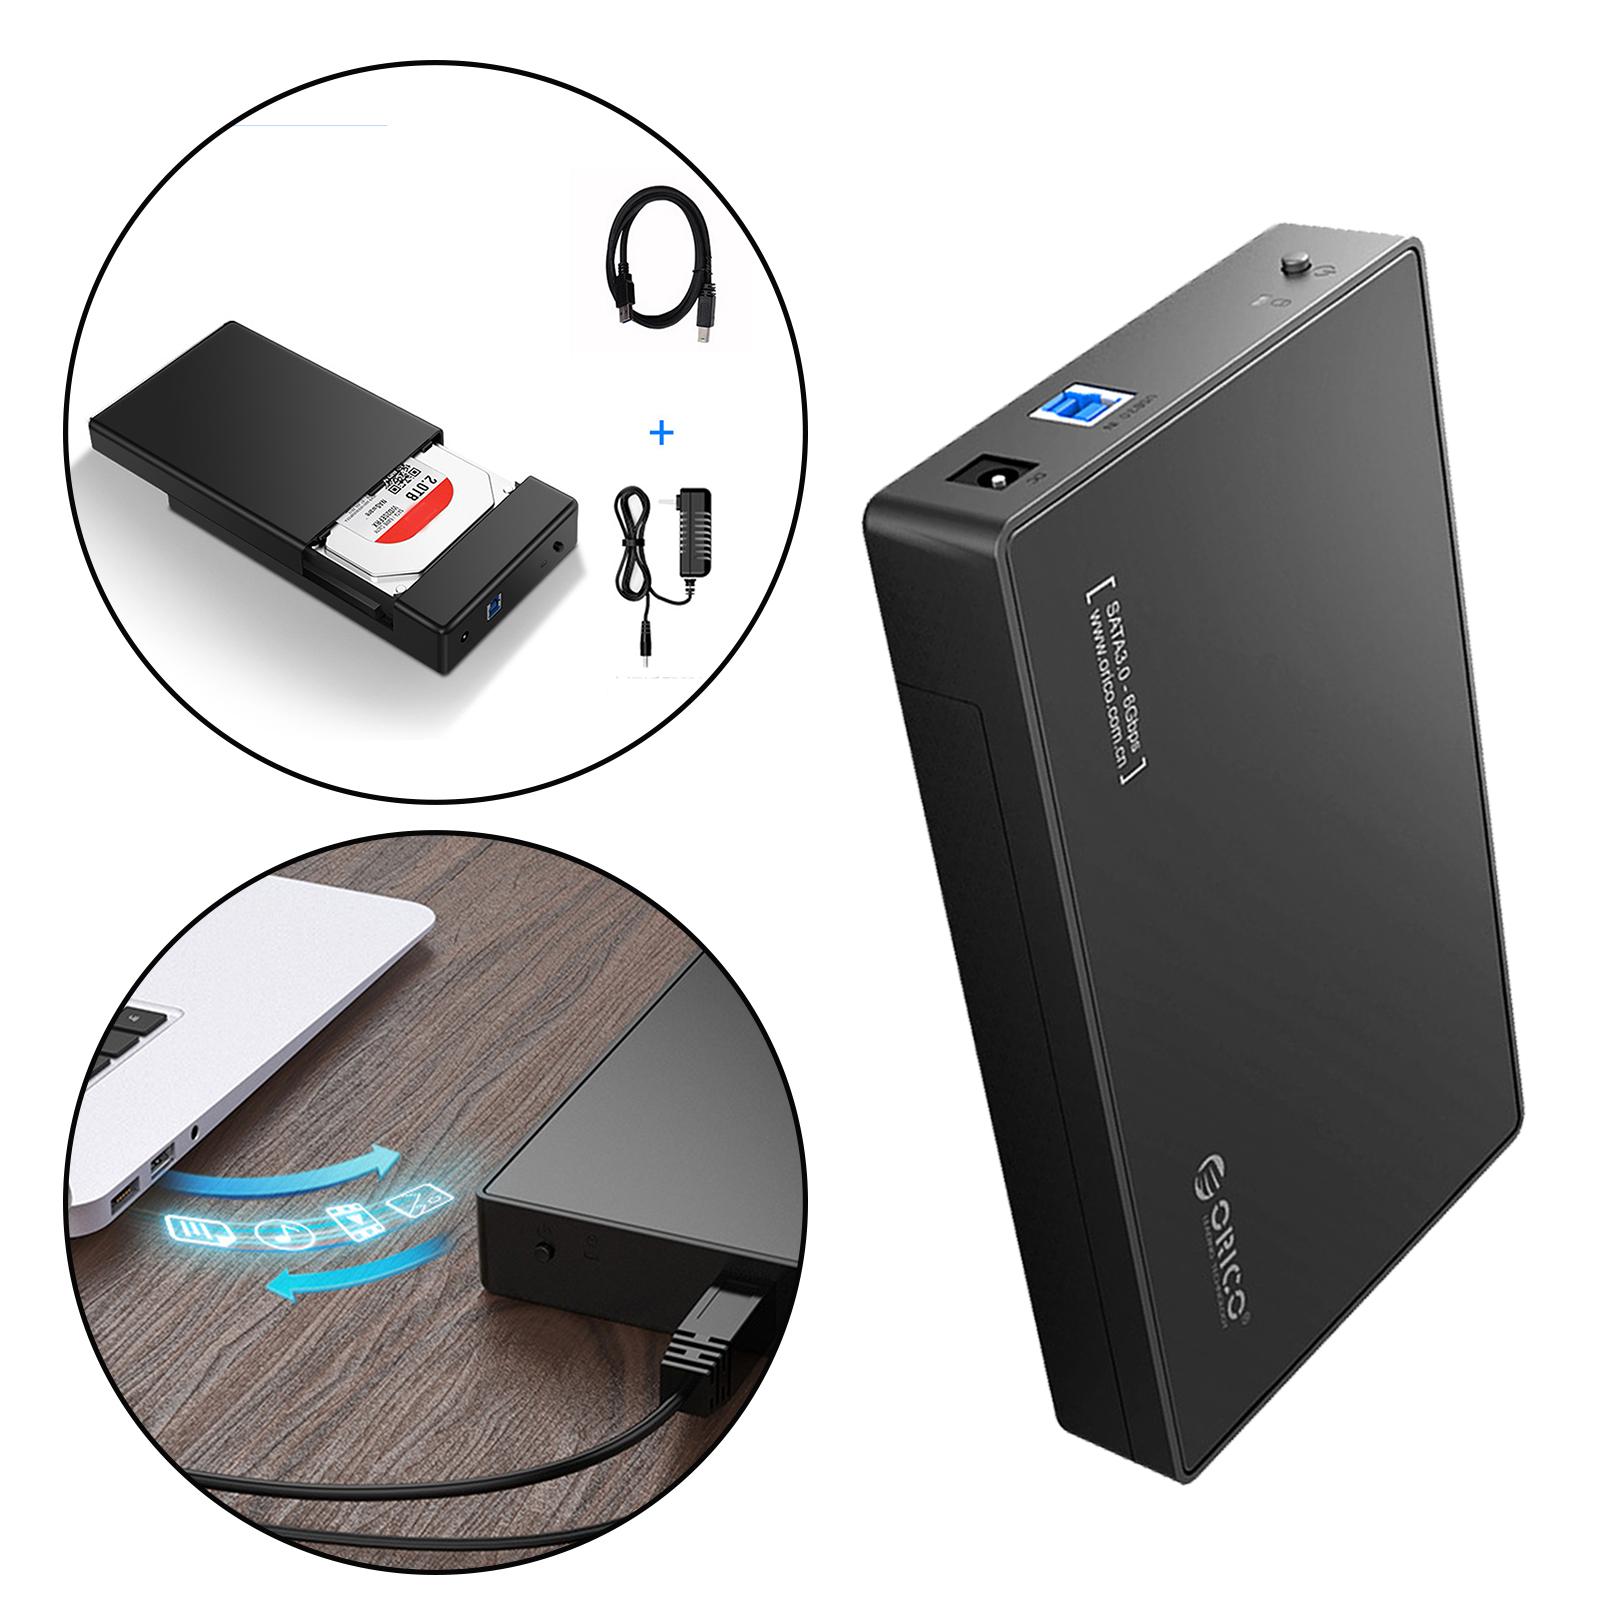 Durable USB 3.0 External Hard Drive Enclosure Disk Case 12V Adapter Support UASP for SATA III HDD SSD 3.5 2.5 Inch